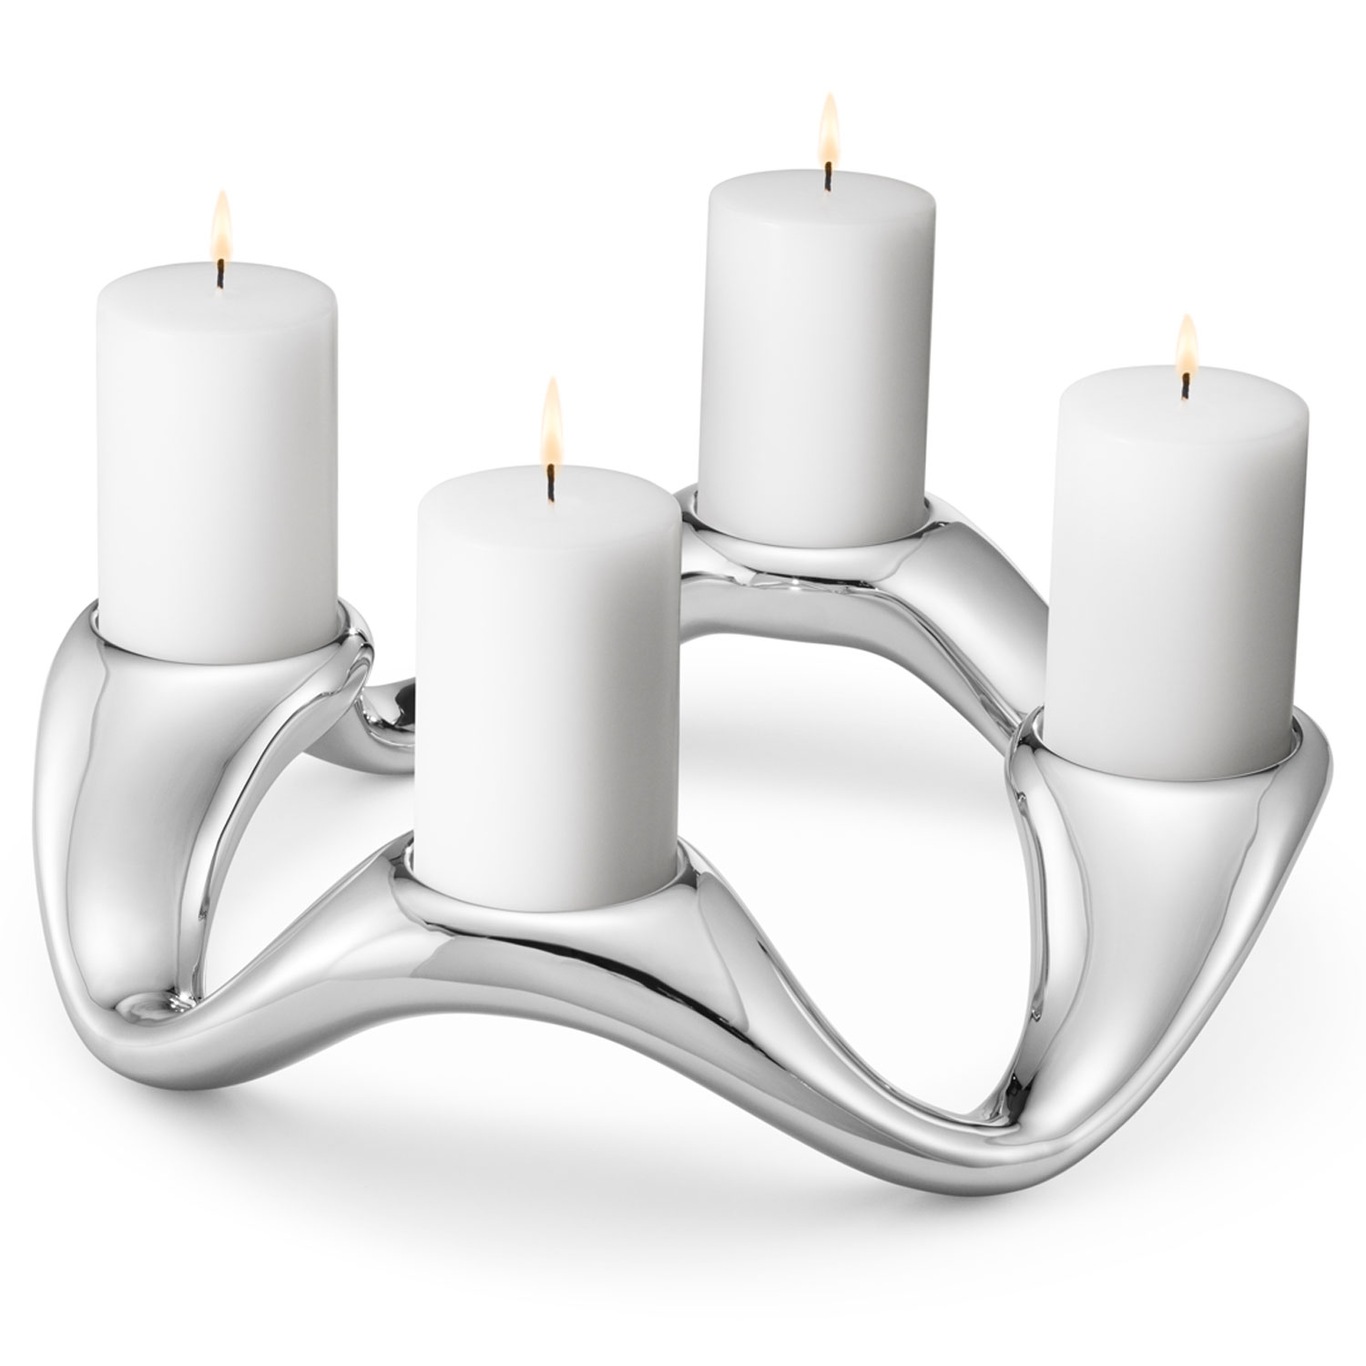 Cobra 4 Candle Holder For Pillar Candles, Stainless Steel